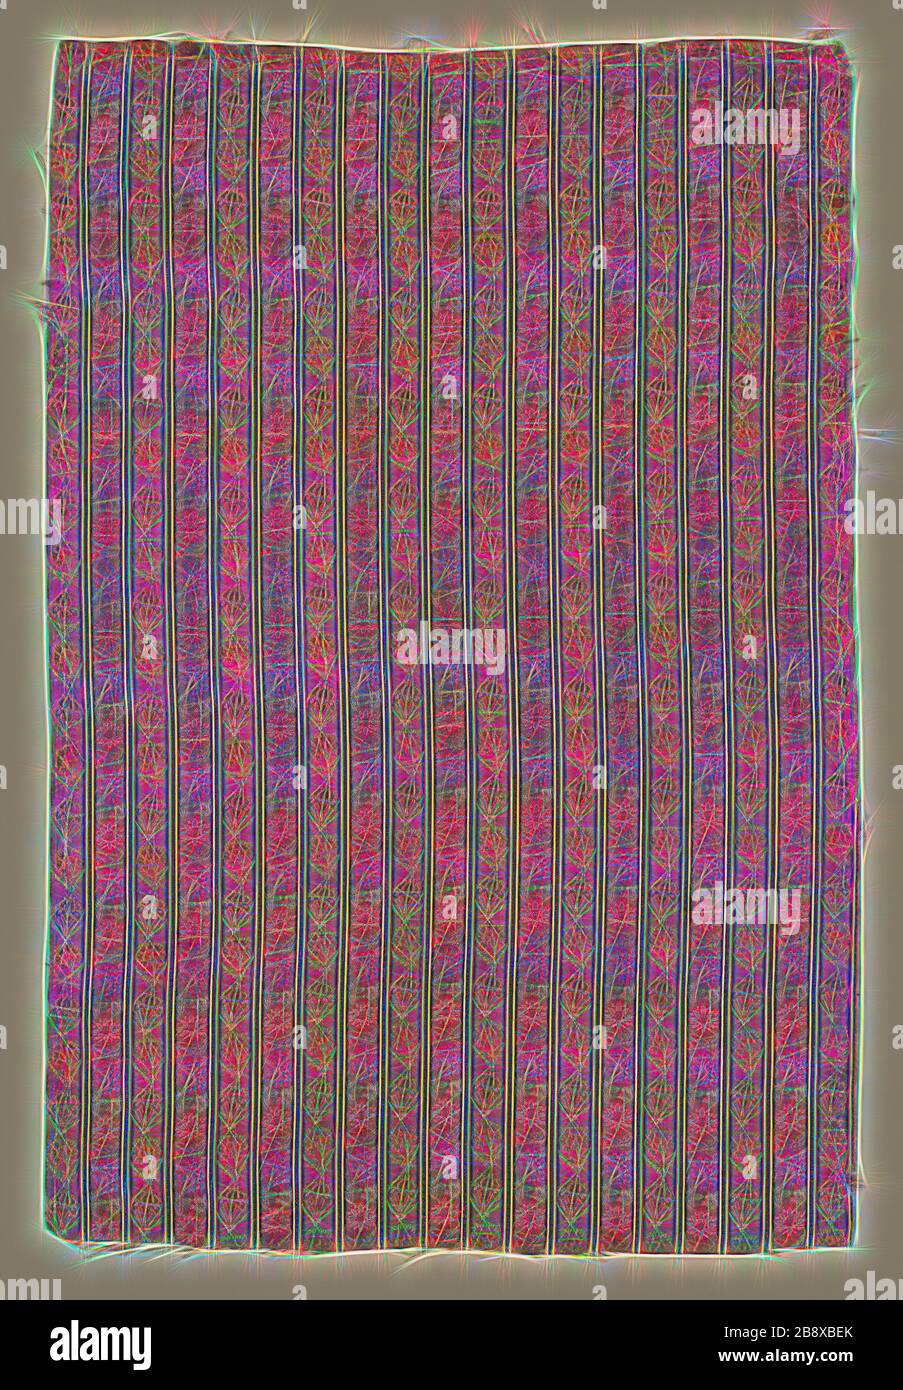 Dress Fabric, 18th century, Iran, Iran, Silk, satin weave with with weft-faced patterning, 51.5 × 34.3 cm (20 1/4 × 13 1/2 in.), Reimagined by Gibon, design of warm cheerful glowing of brightness and light rays radiance. Classic art reinvented with a modern twist. Photography inspired by futurism, embracing dynamic energy of modern technology, movement, speed and revolutionize culture. Stock Photo